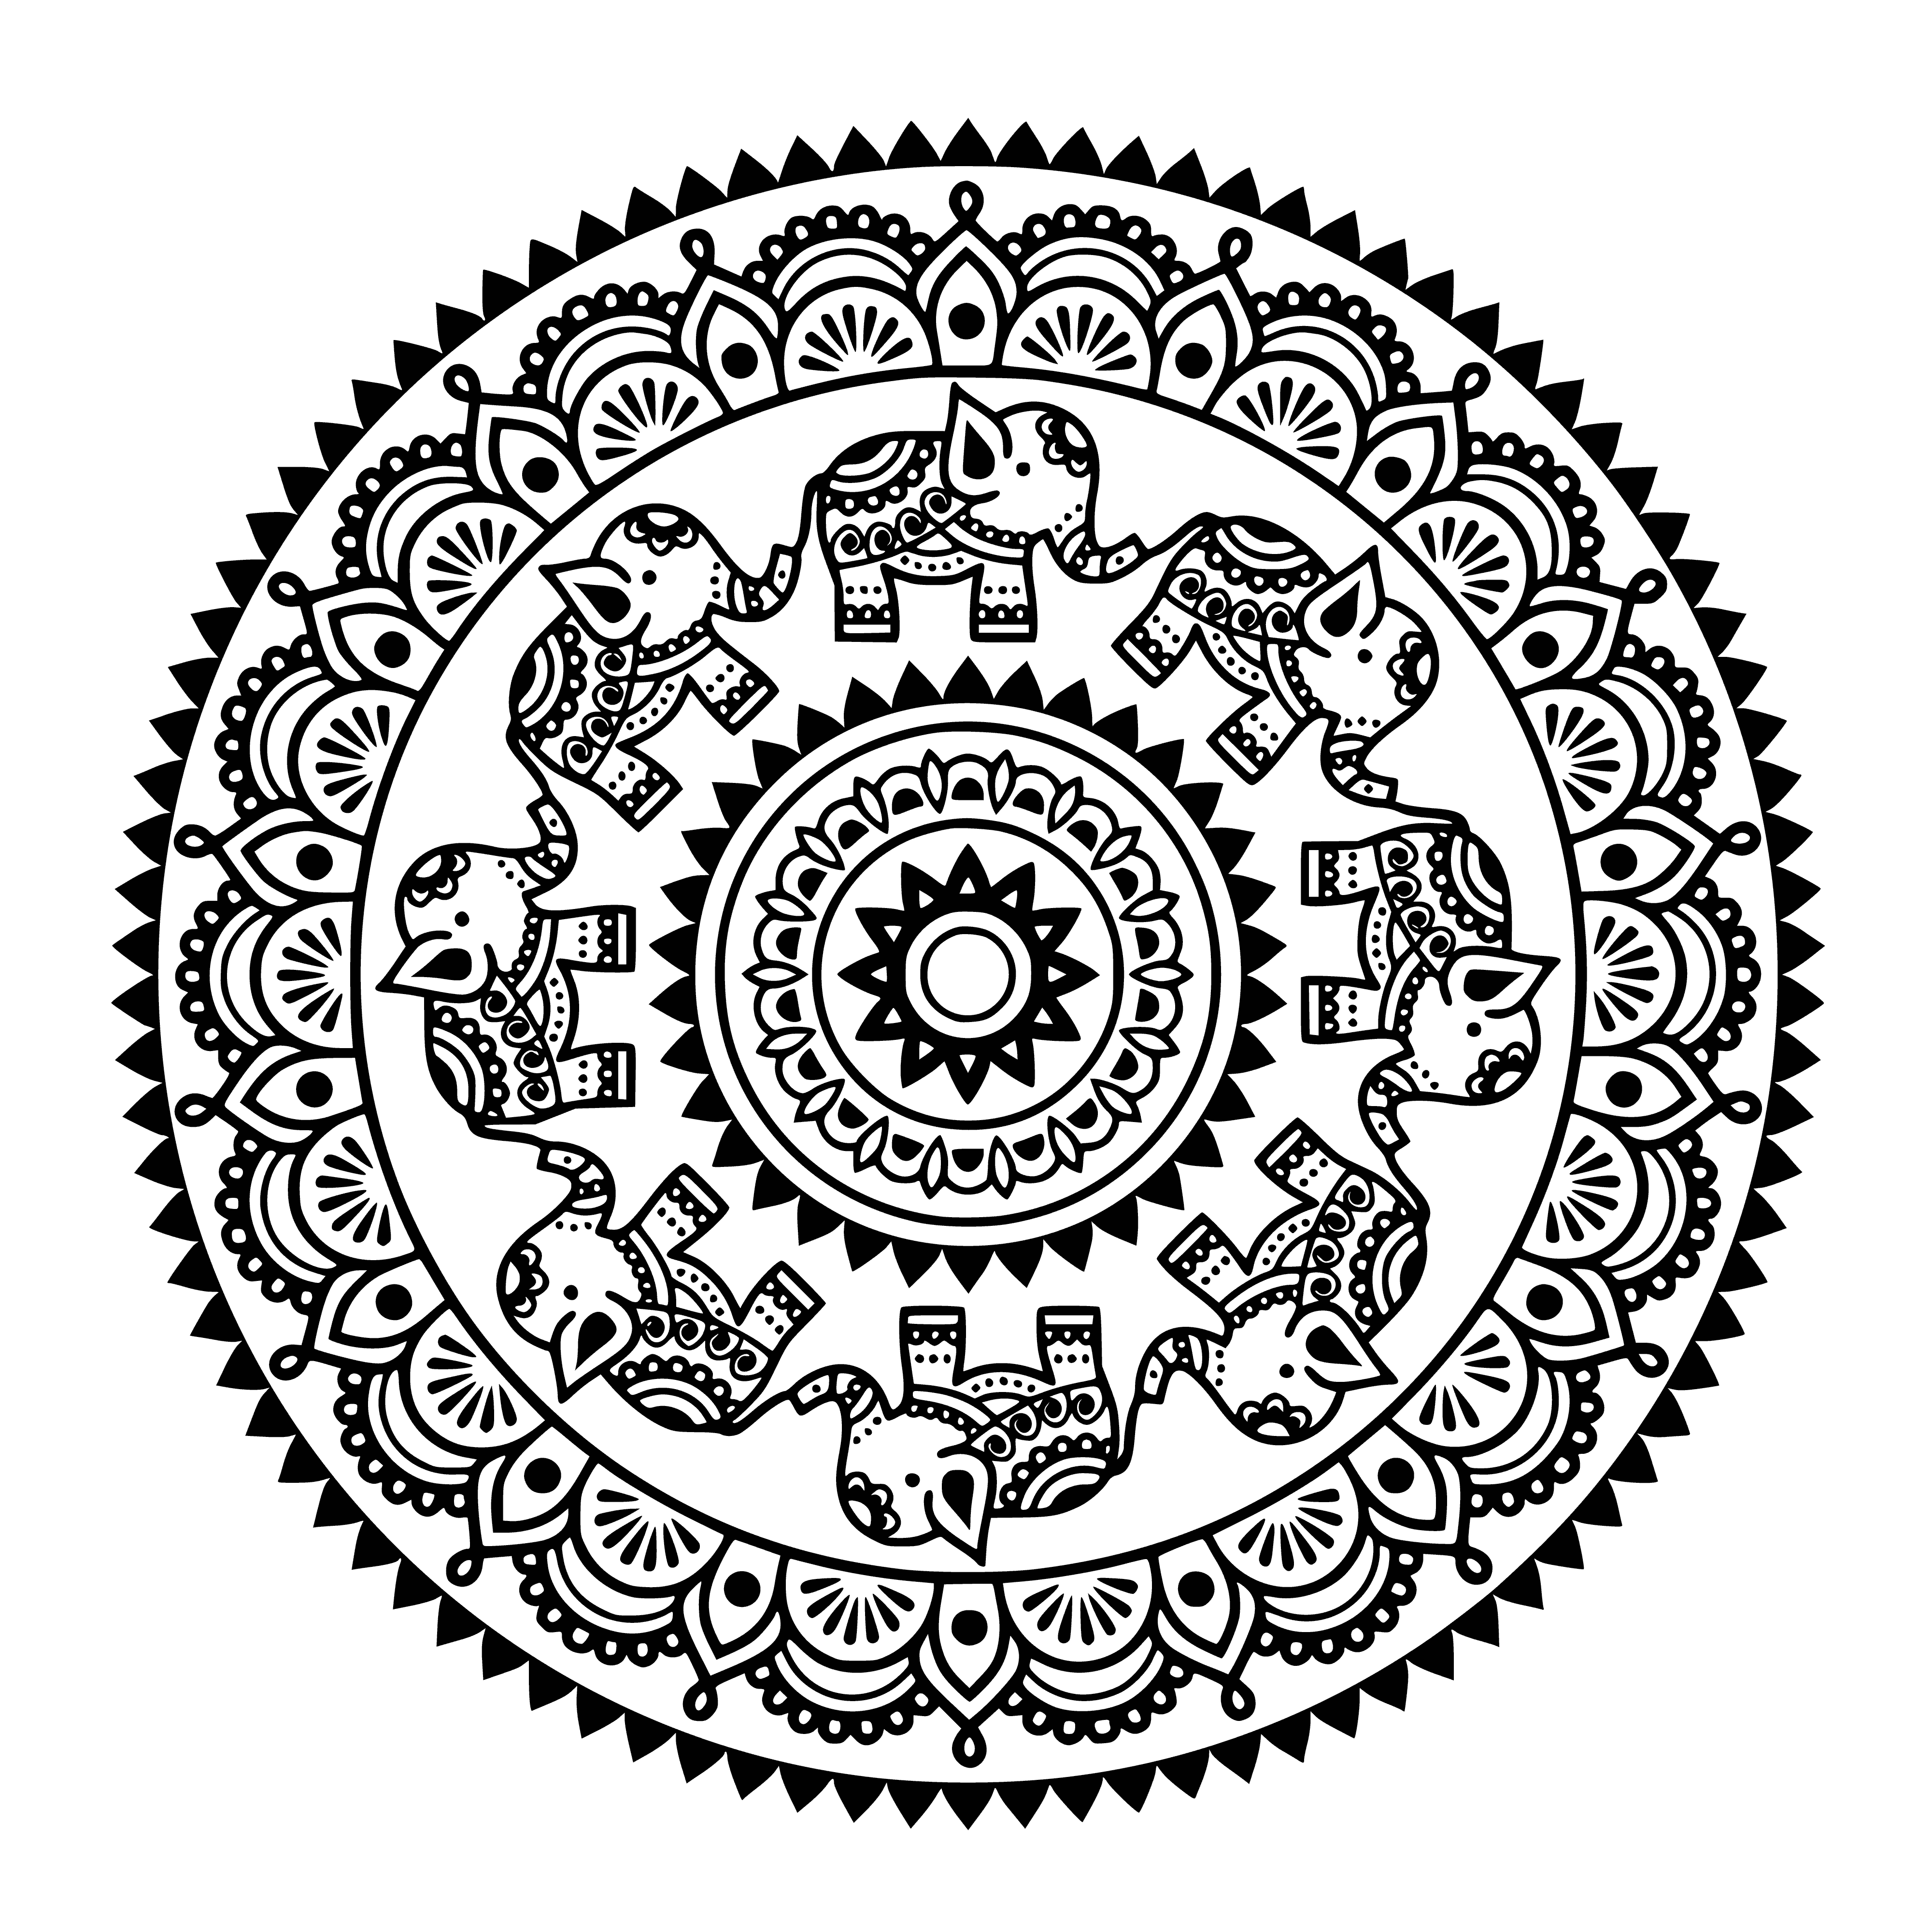 coloring page: Design with intricate geometry and details, creating complex shapes within circles.